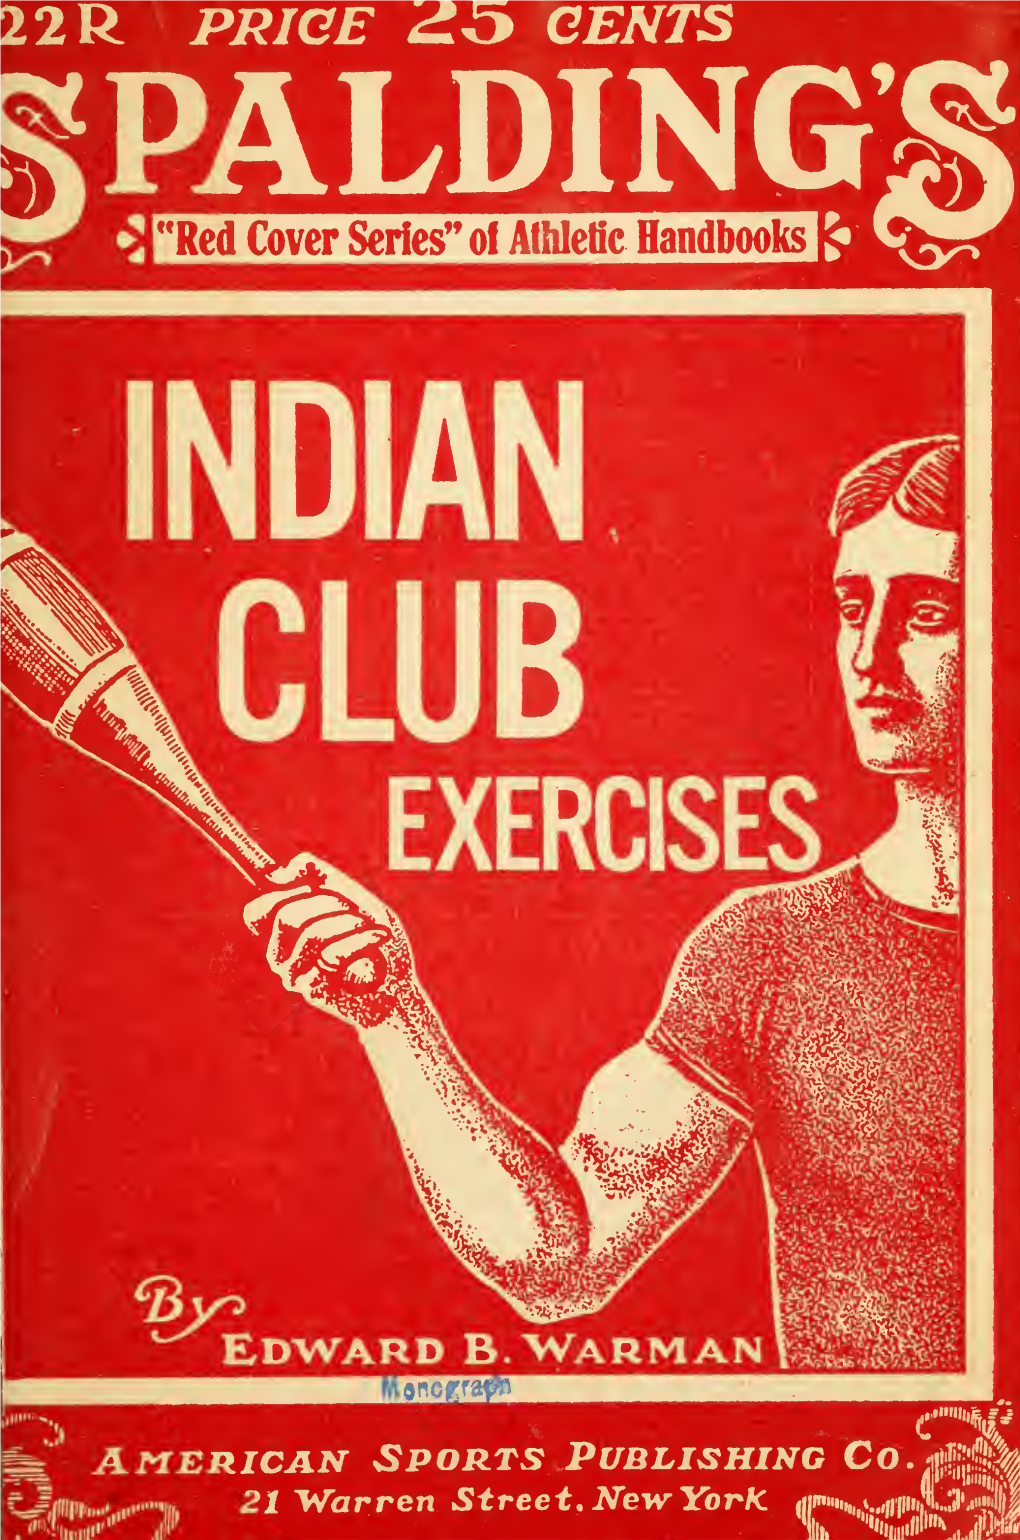 Spalding's Indian Club Exercises